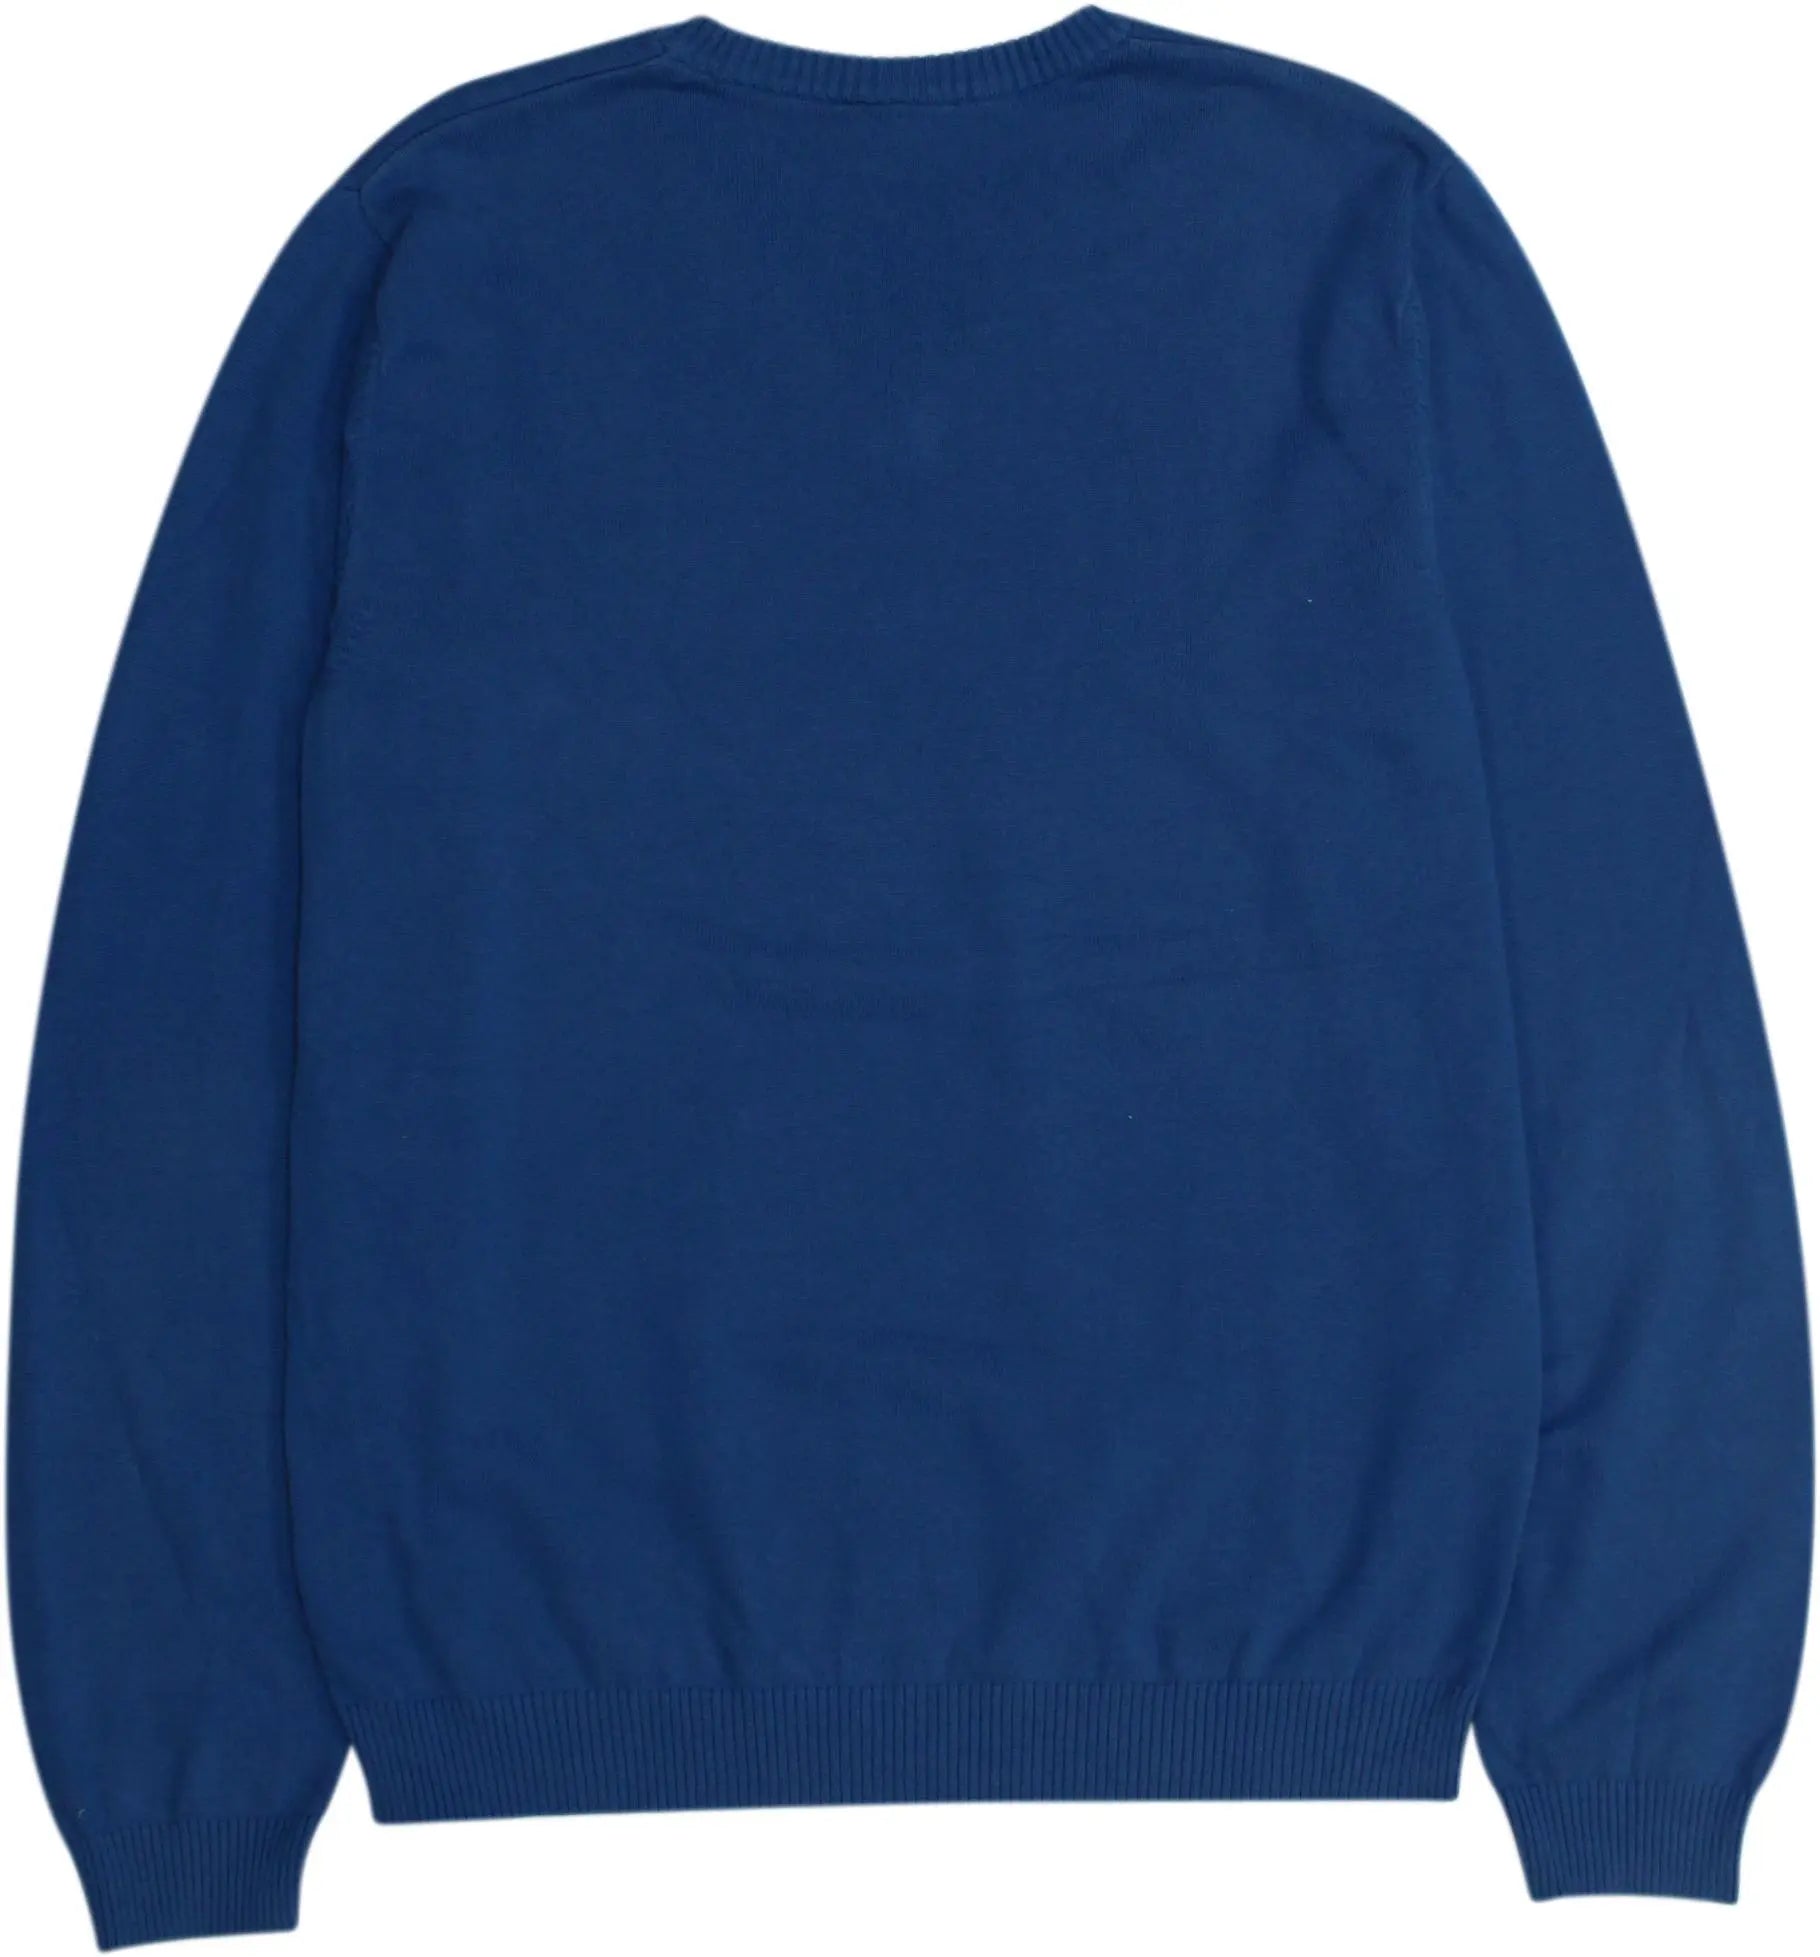 Lacoste - Blue V-Neck Jumper by Lacoste- ThriftTale.com - Vintage and second handclothing